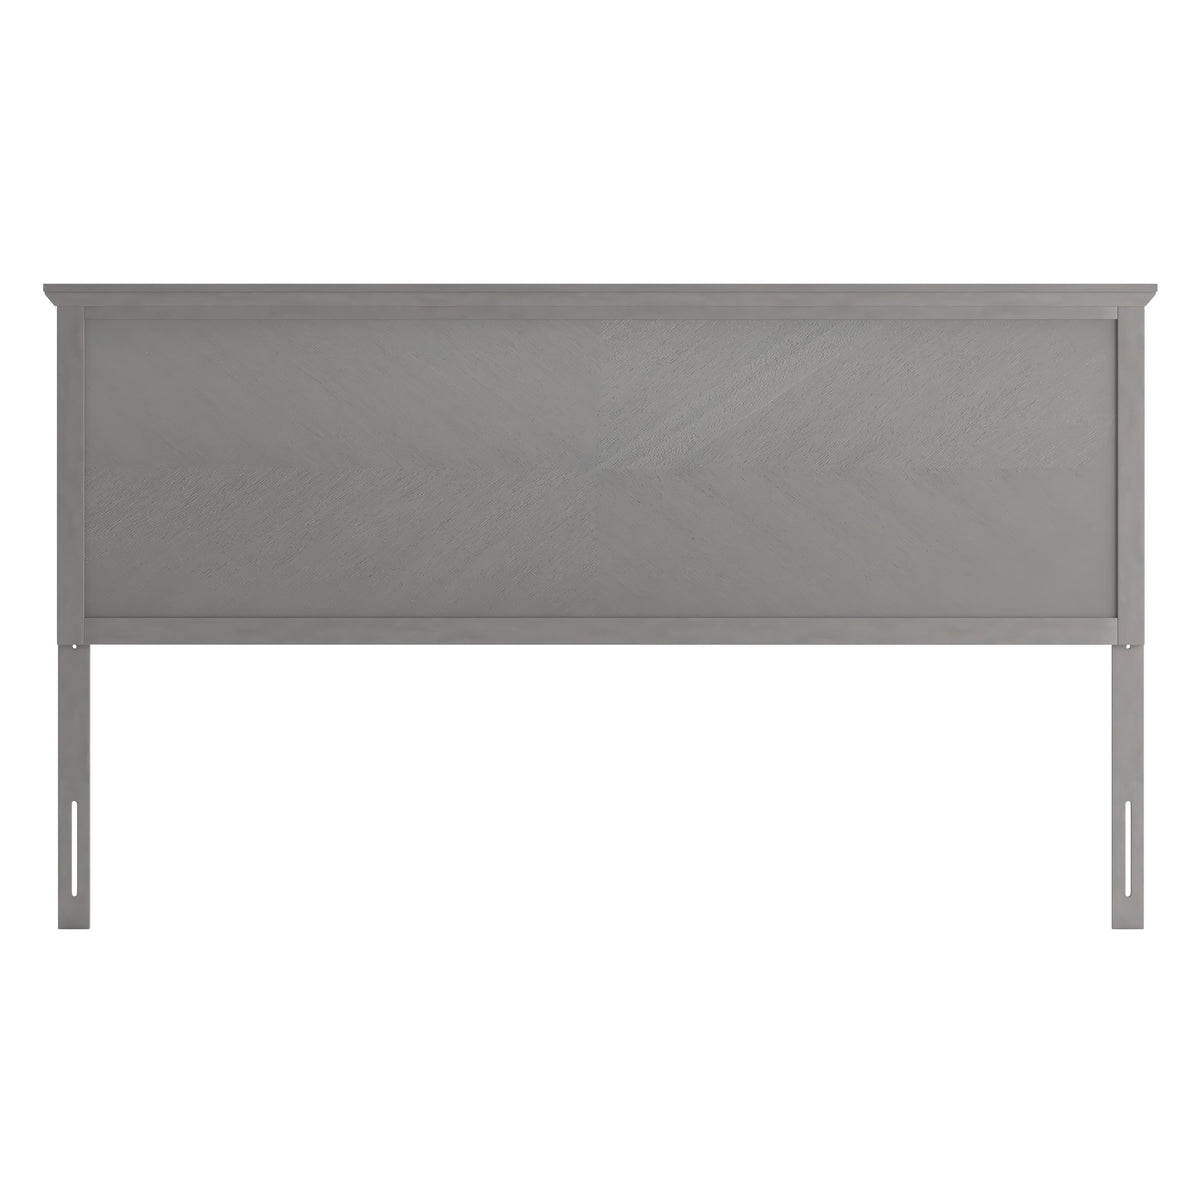 Gray Wash,King |#| Contemporary King Size Herring Bone Wooden Headboard Only in Gray Wash